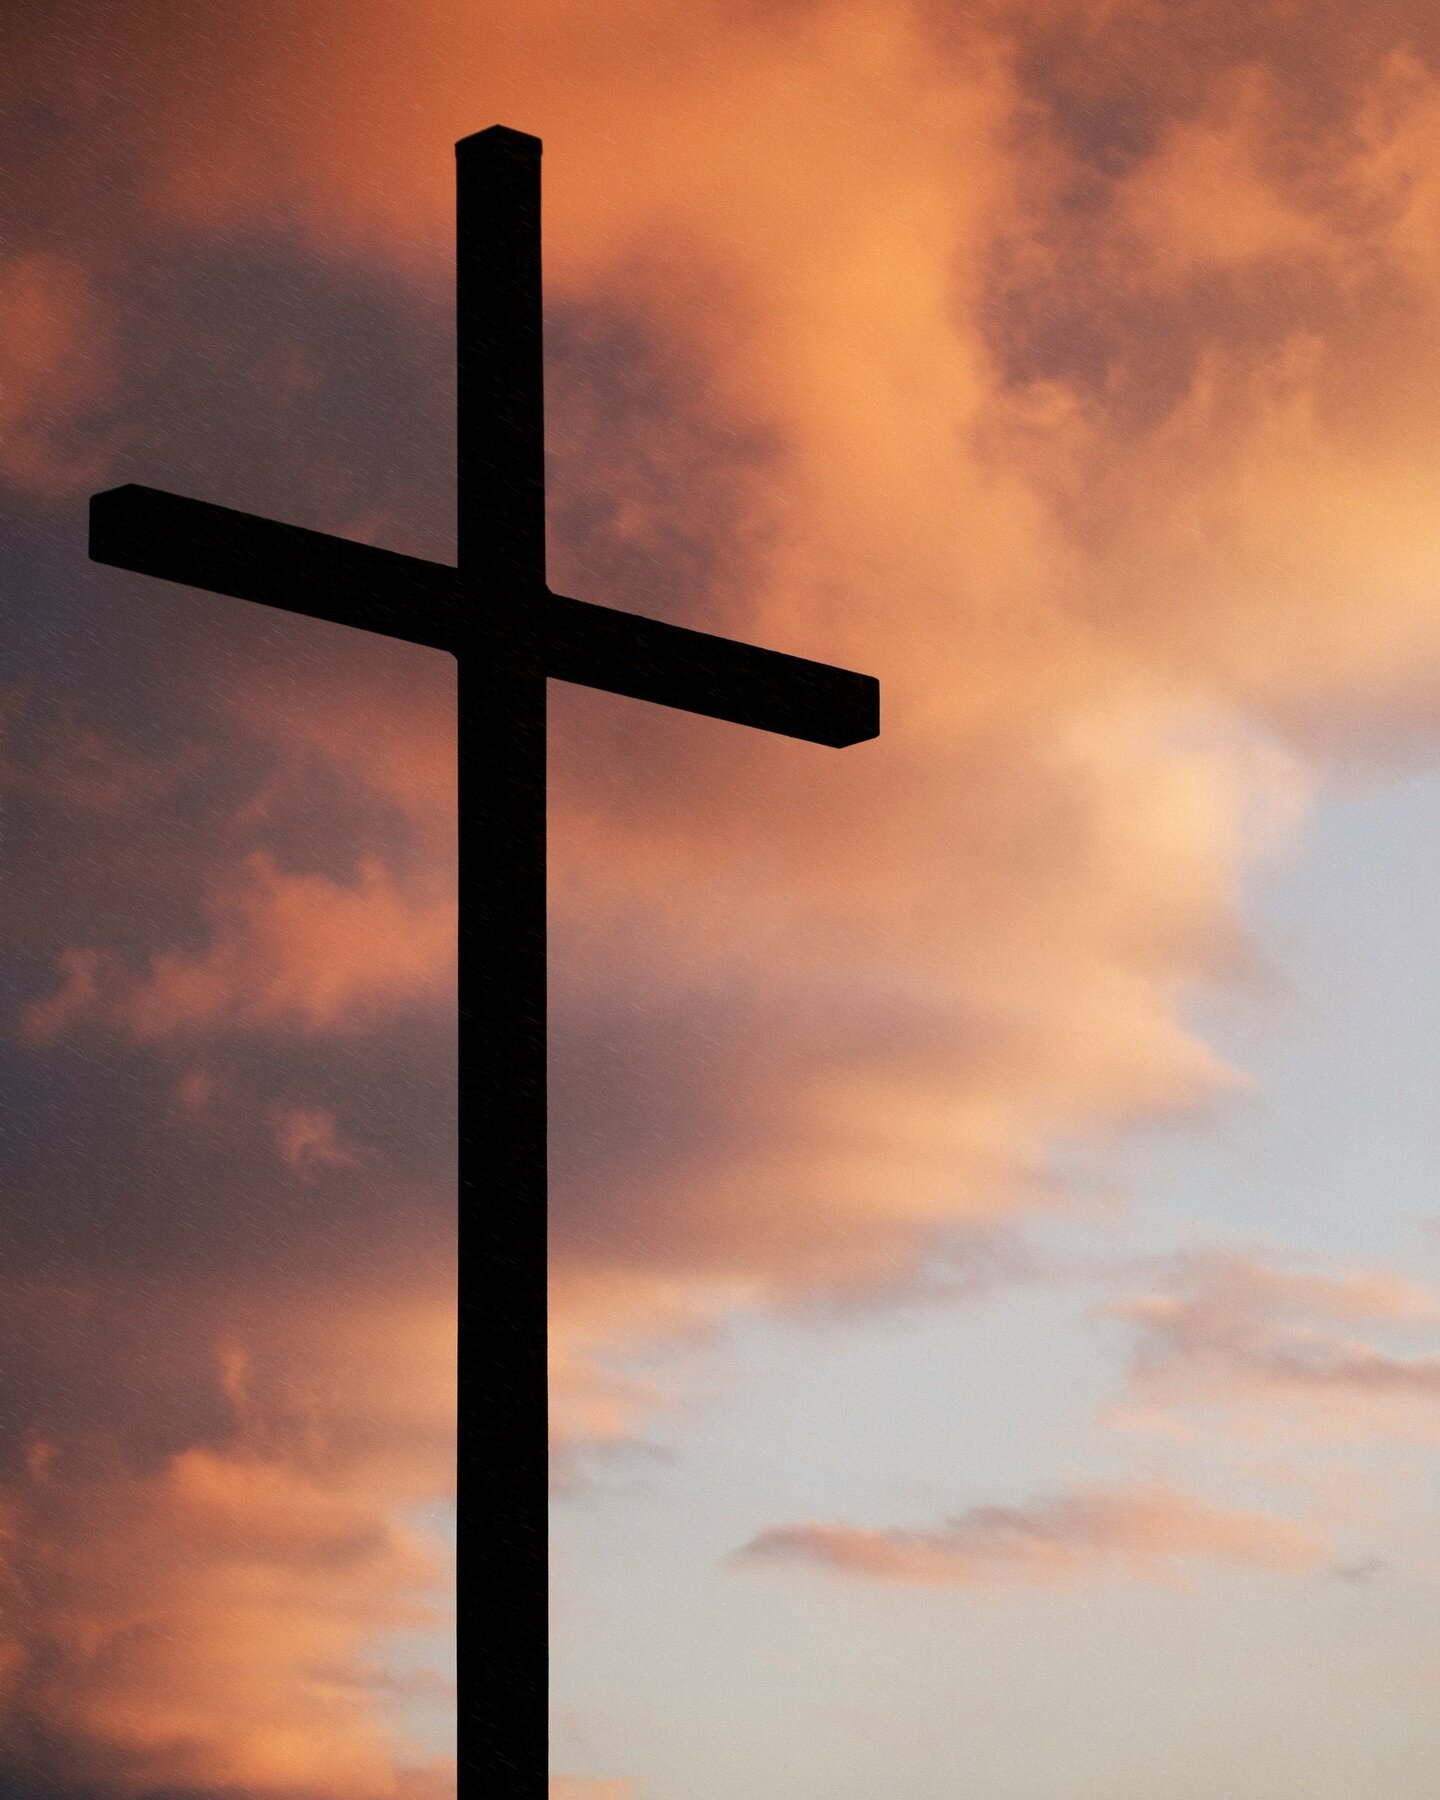 Today, we reflect on the ultimate sacrifice of love. Jesus willingly gave His life for us, demonstrating the depth of God&rsquo;s love for all humanity. 

May this Good Friday be a solemn reminder of His incredible grace and redemption. 

#goodfriday